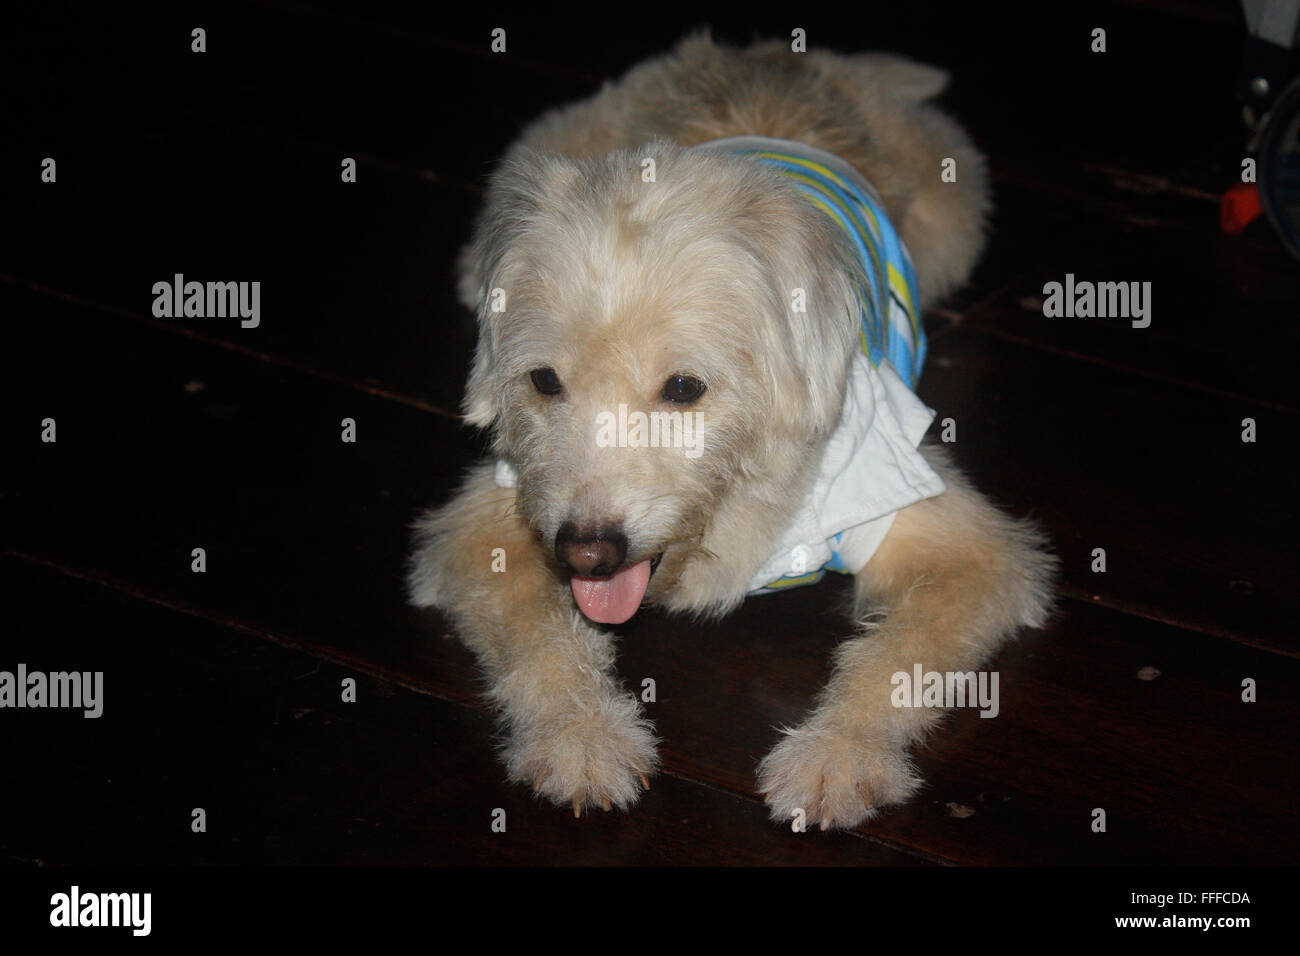 Dressed male dog with his tongue outside and relaxed mode. Stock Photo